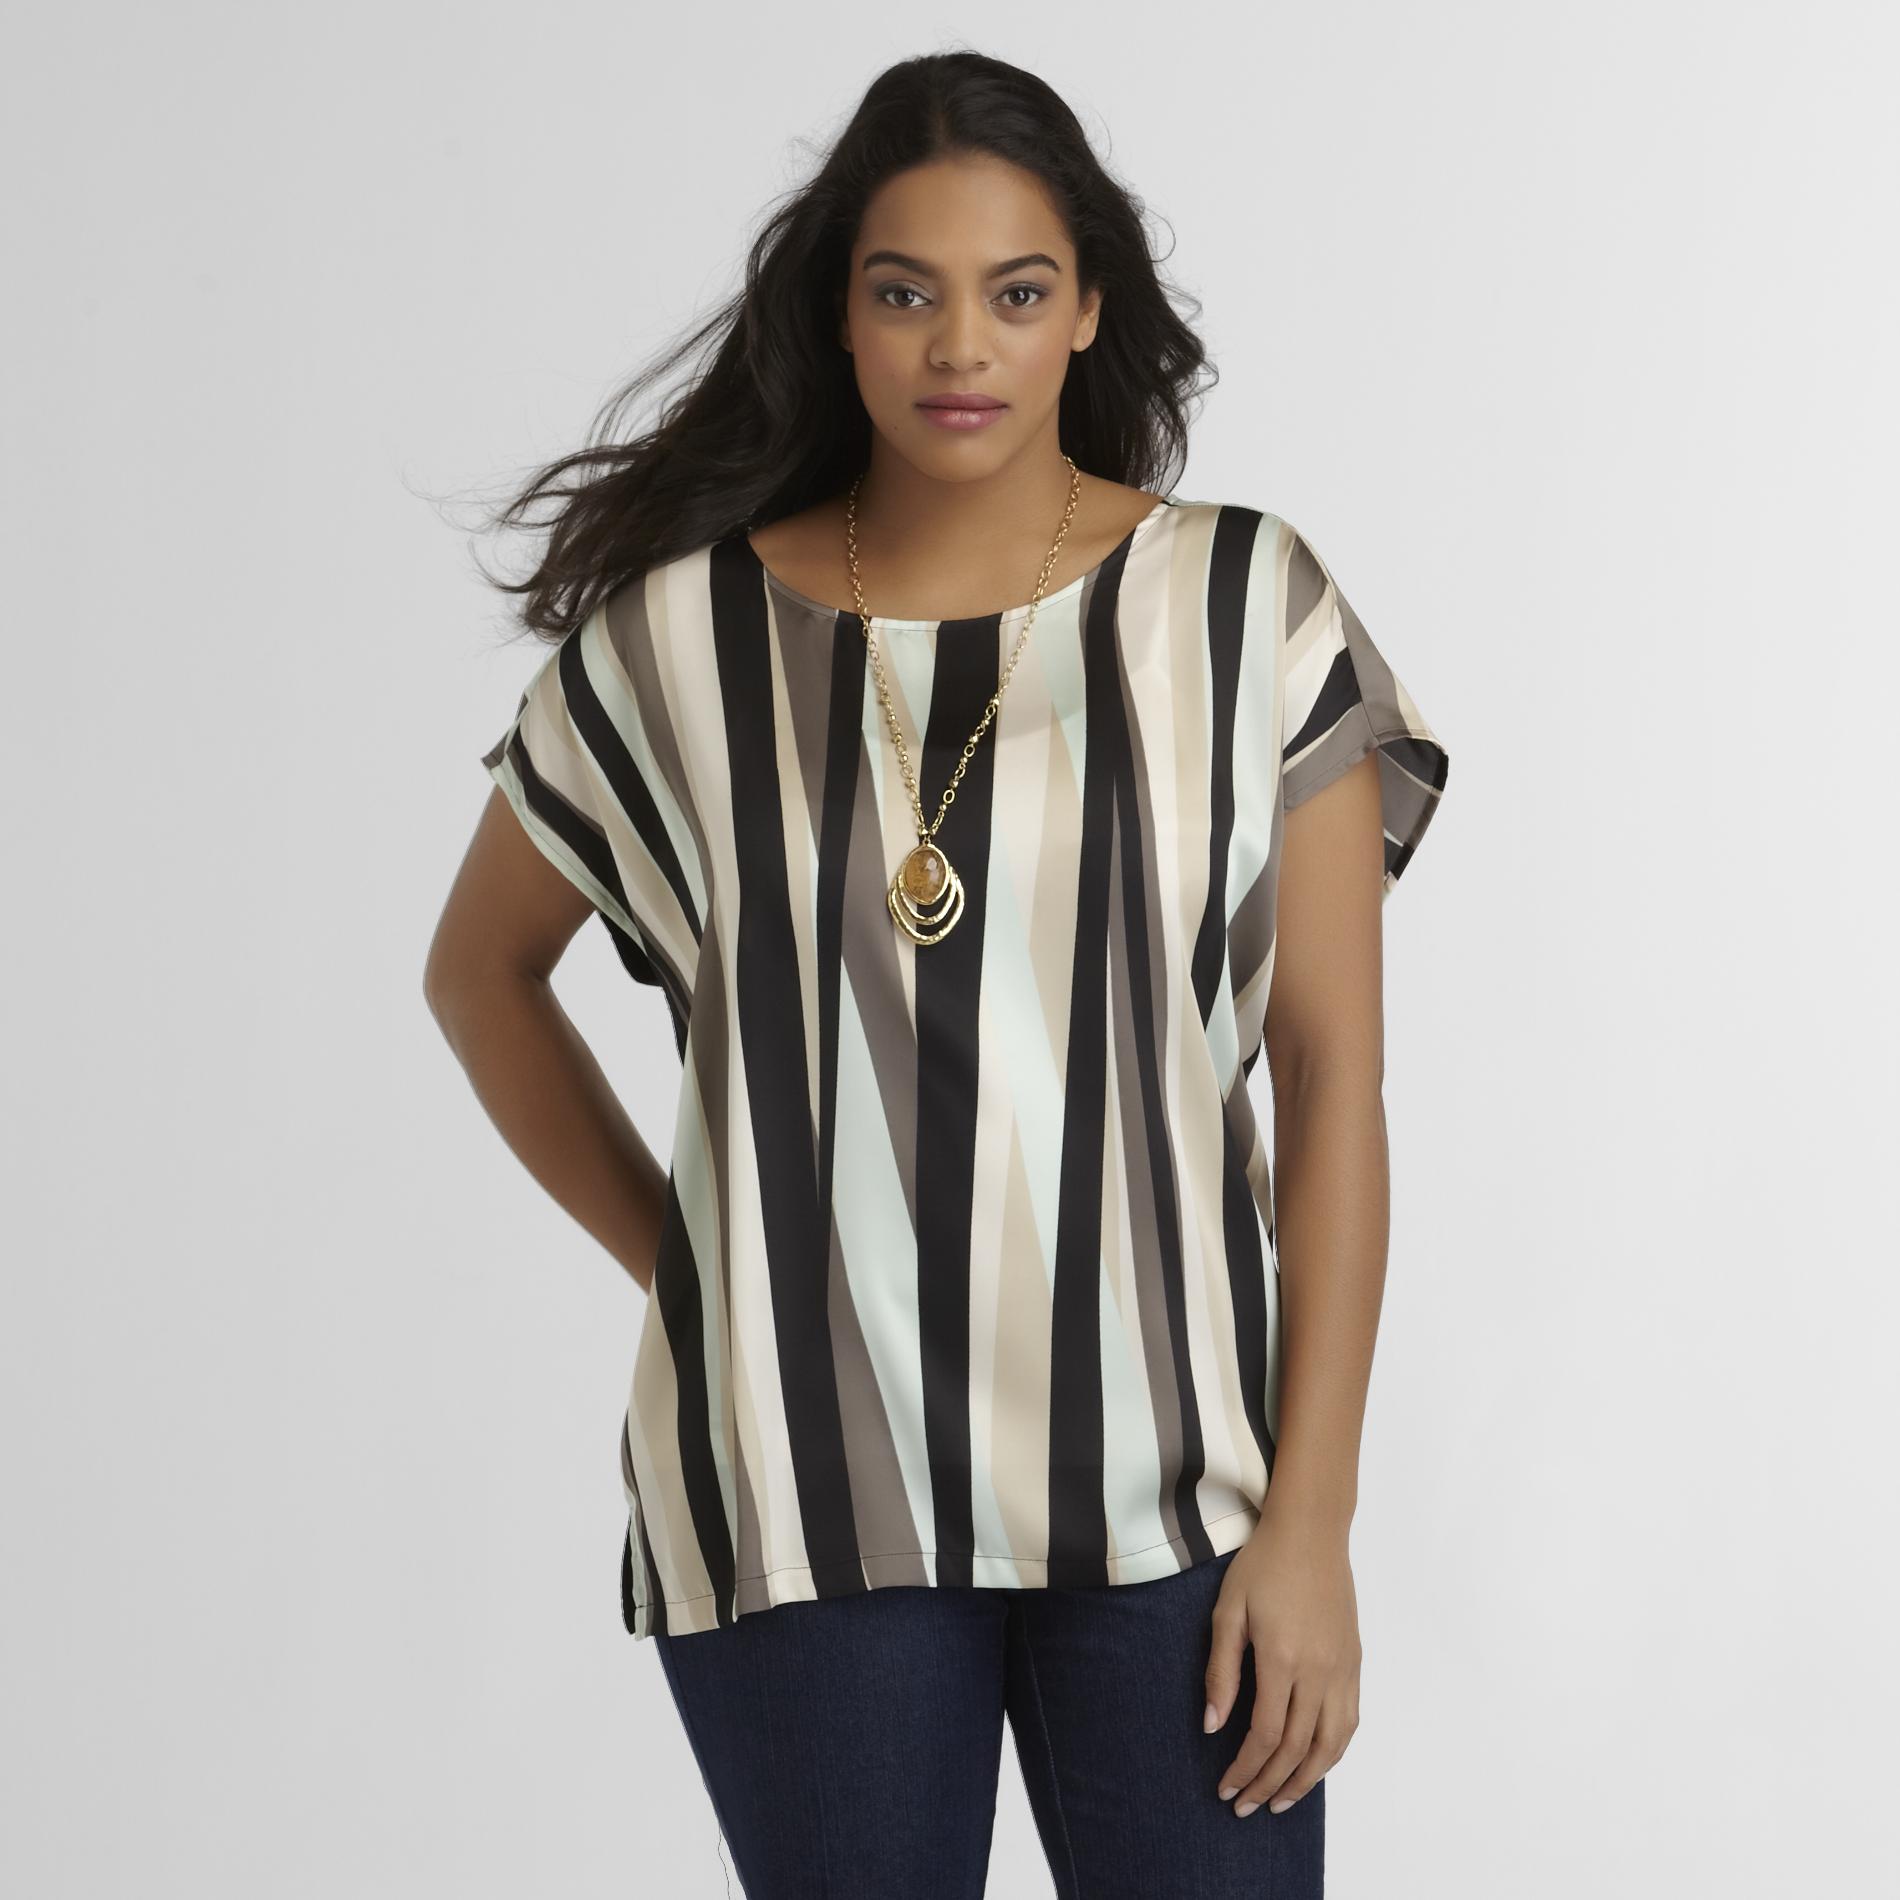 Love Your Style, Love Your Size Women's Plus Top - Stripe